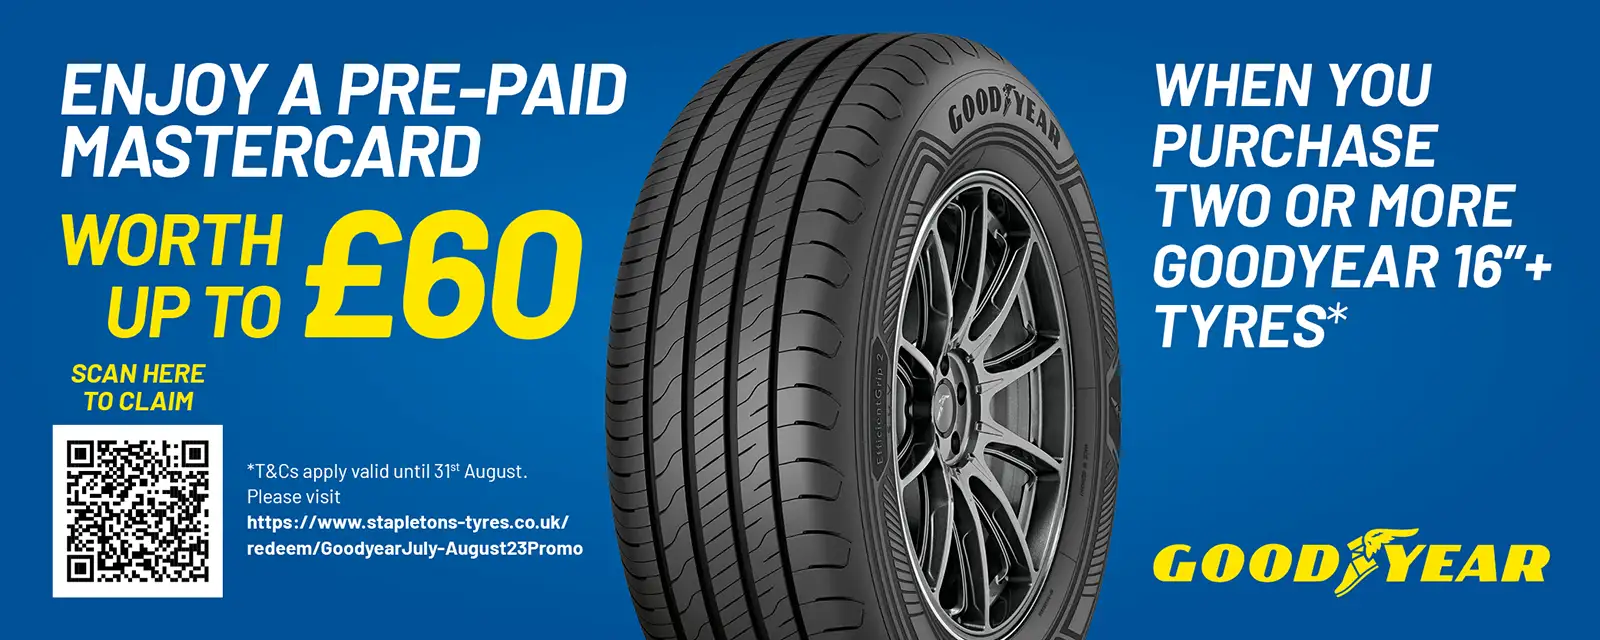 goodyear-tyres-offer